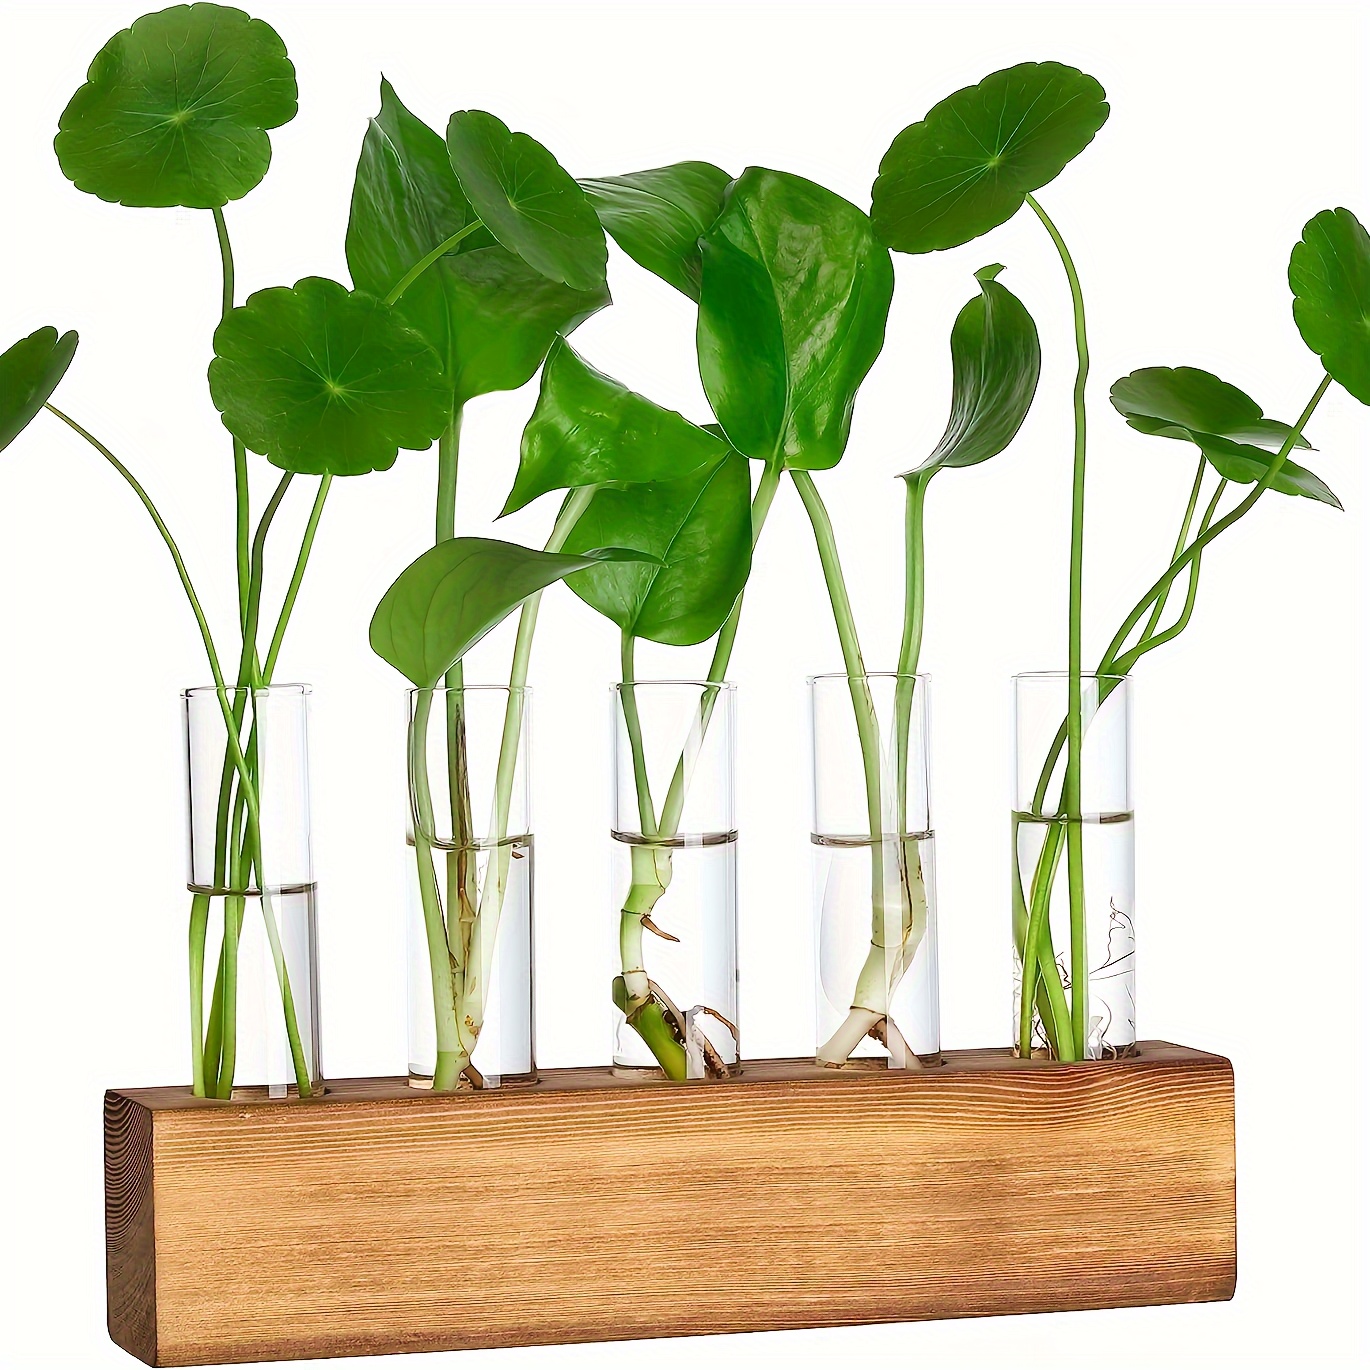 

Set, Hydroponic Plant Vases, Wooden Base With Glass Propagation Test Tubes, Chic Home Indoor Decor, Elegant Gift